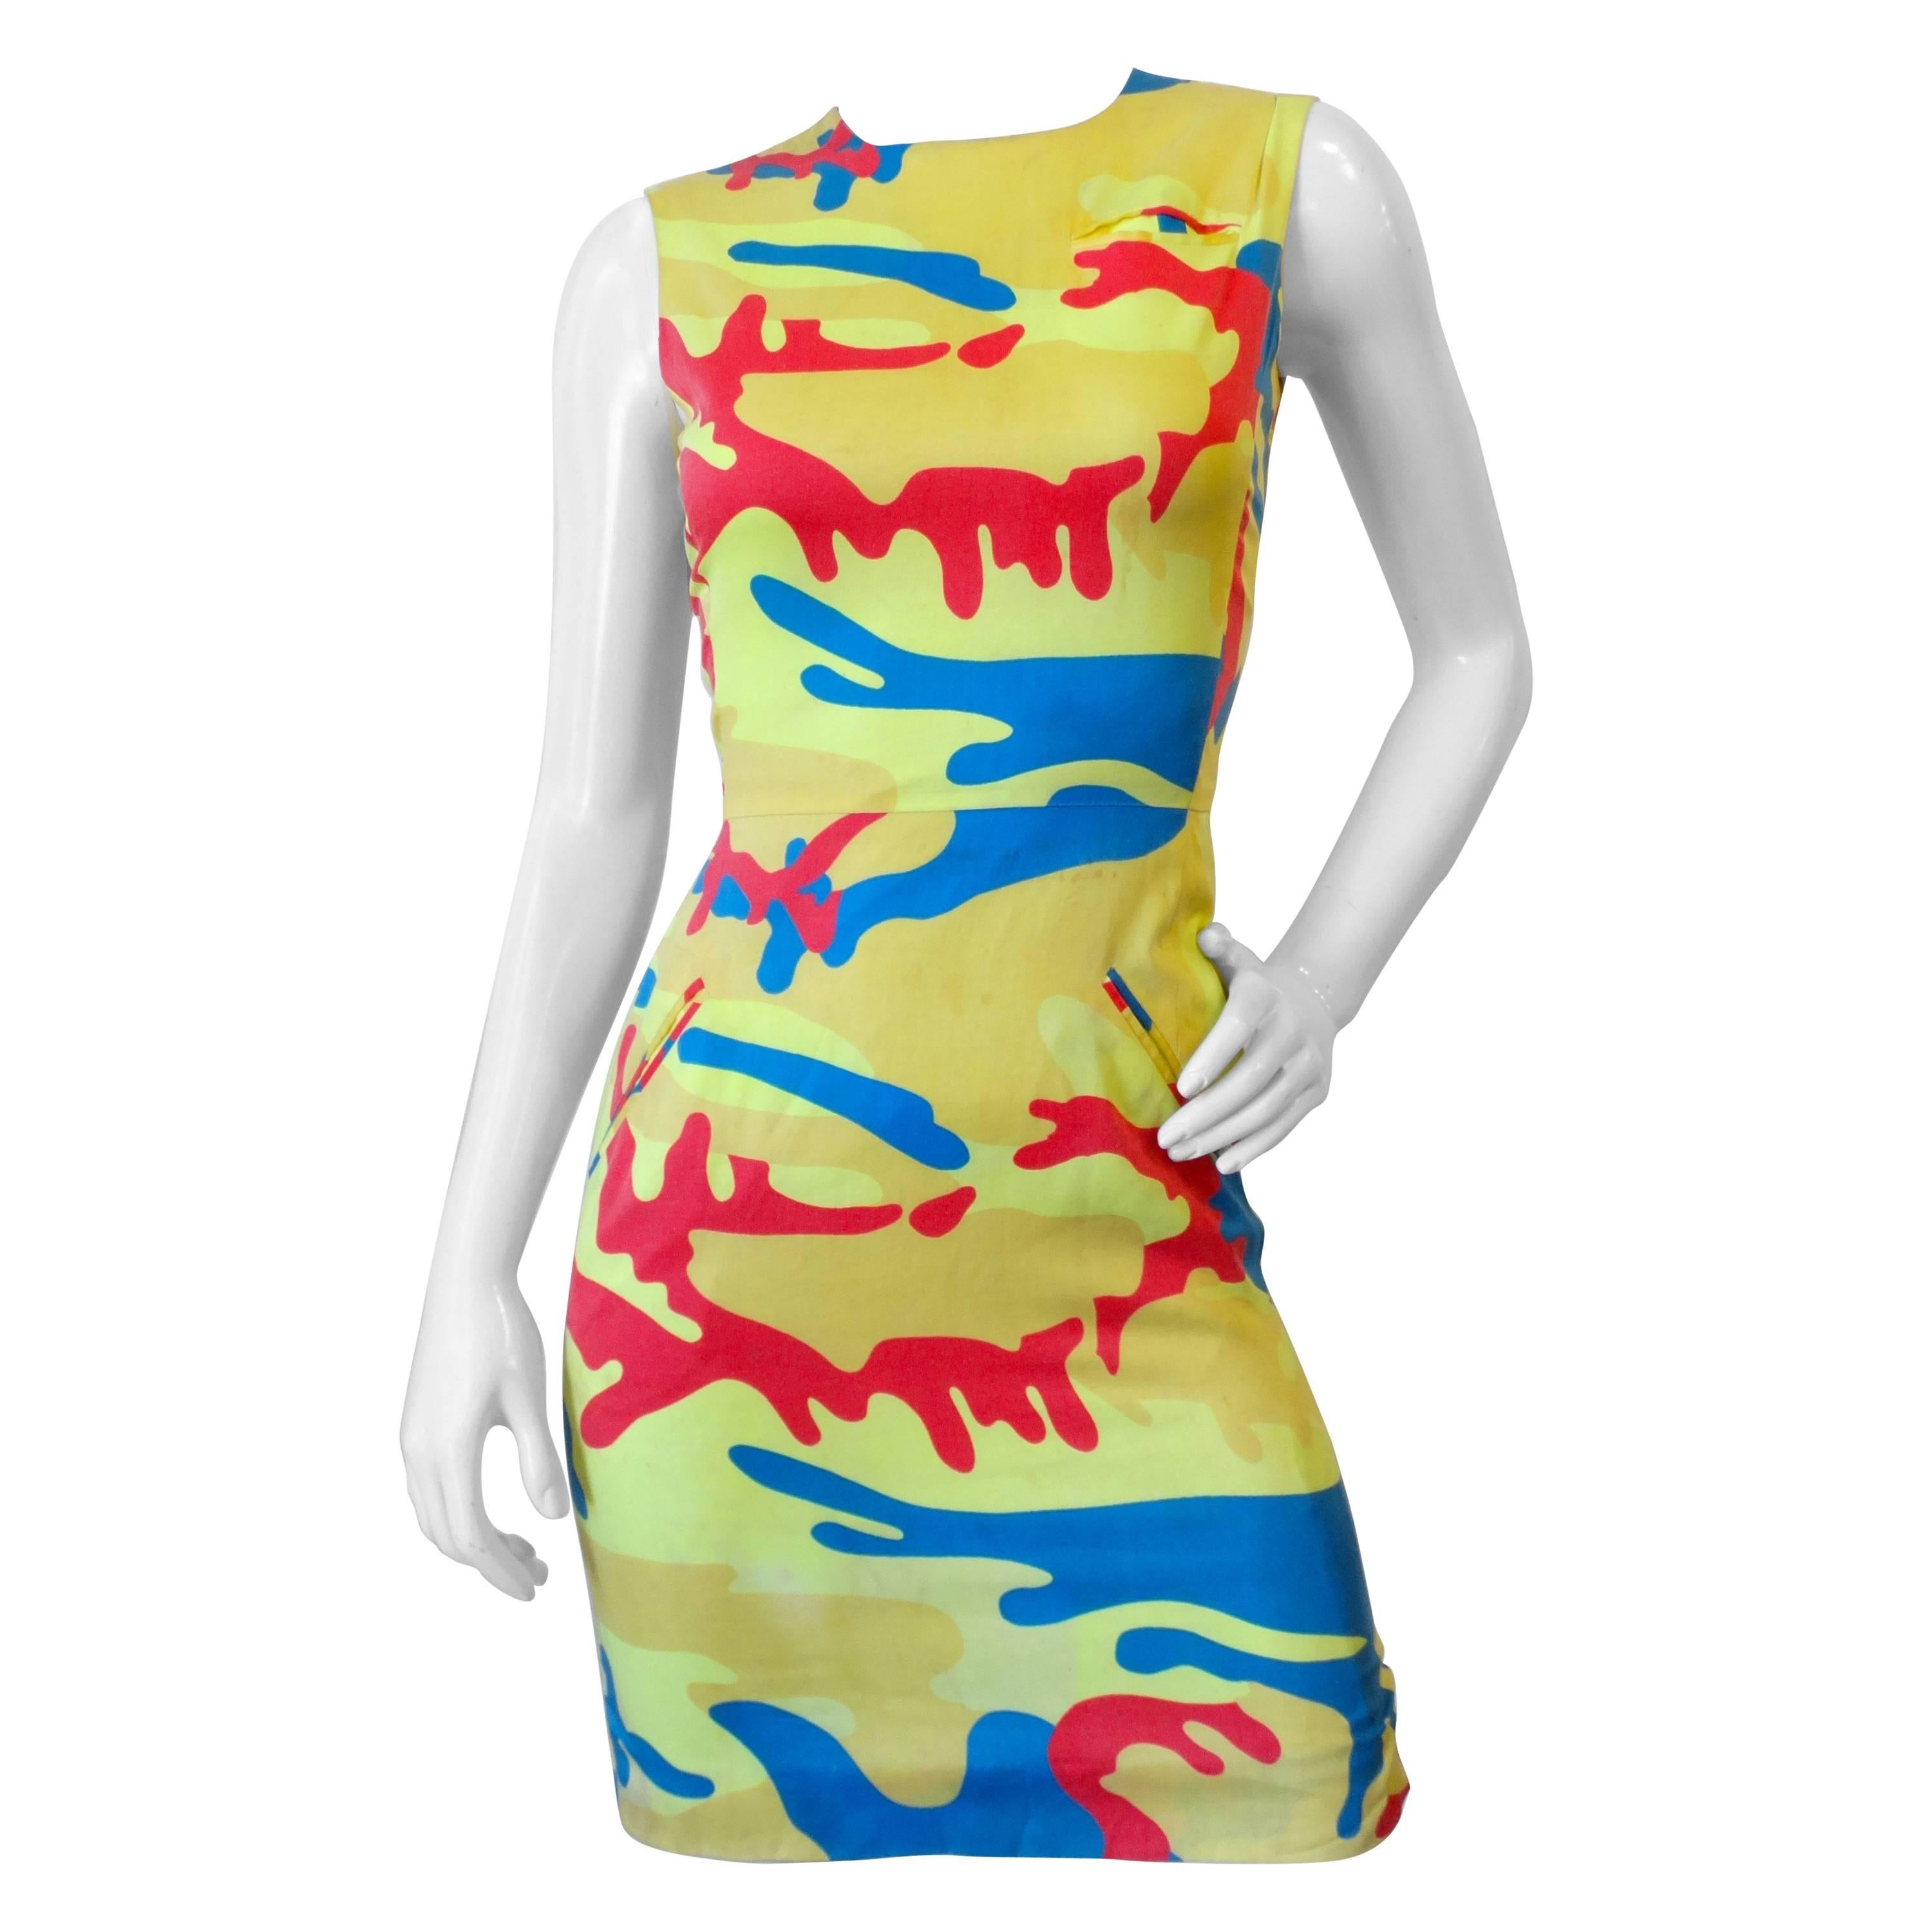 1987 Stephen Sprouse x Andy Warhol Technicolor Camo Dress